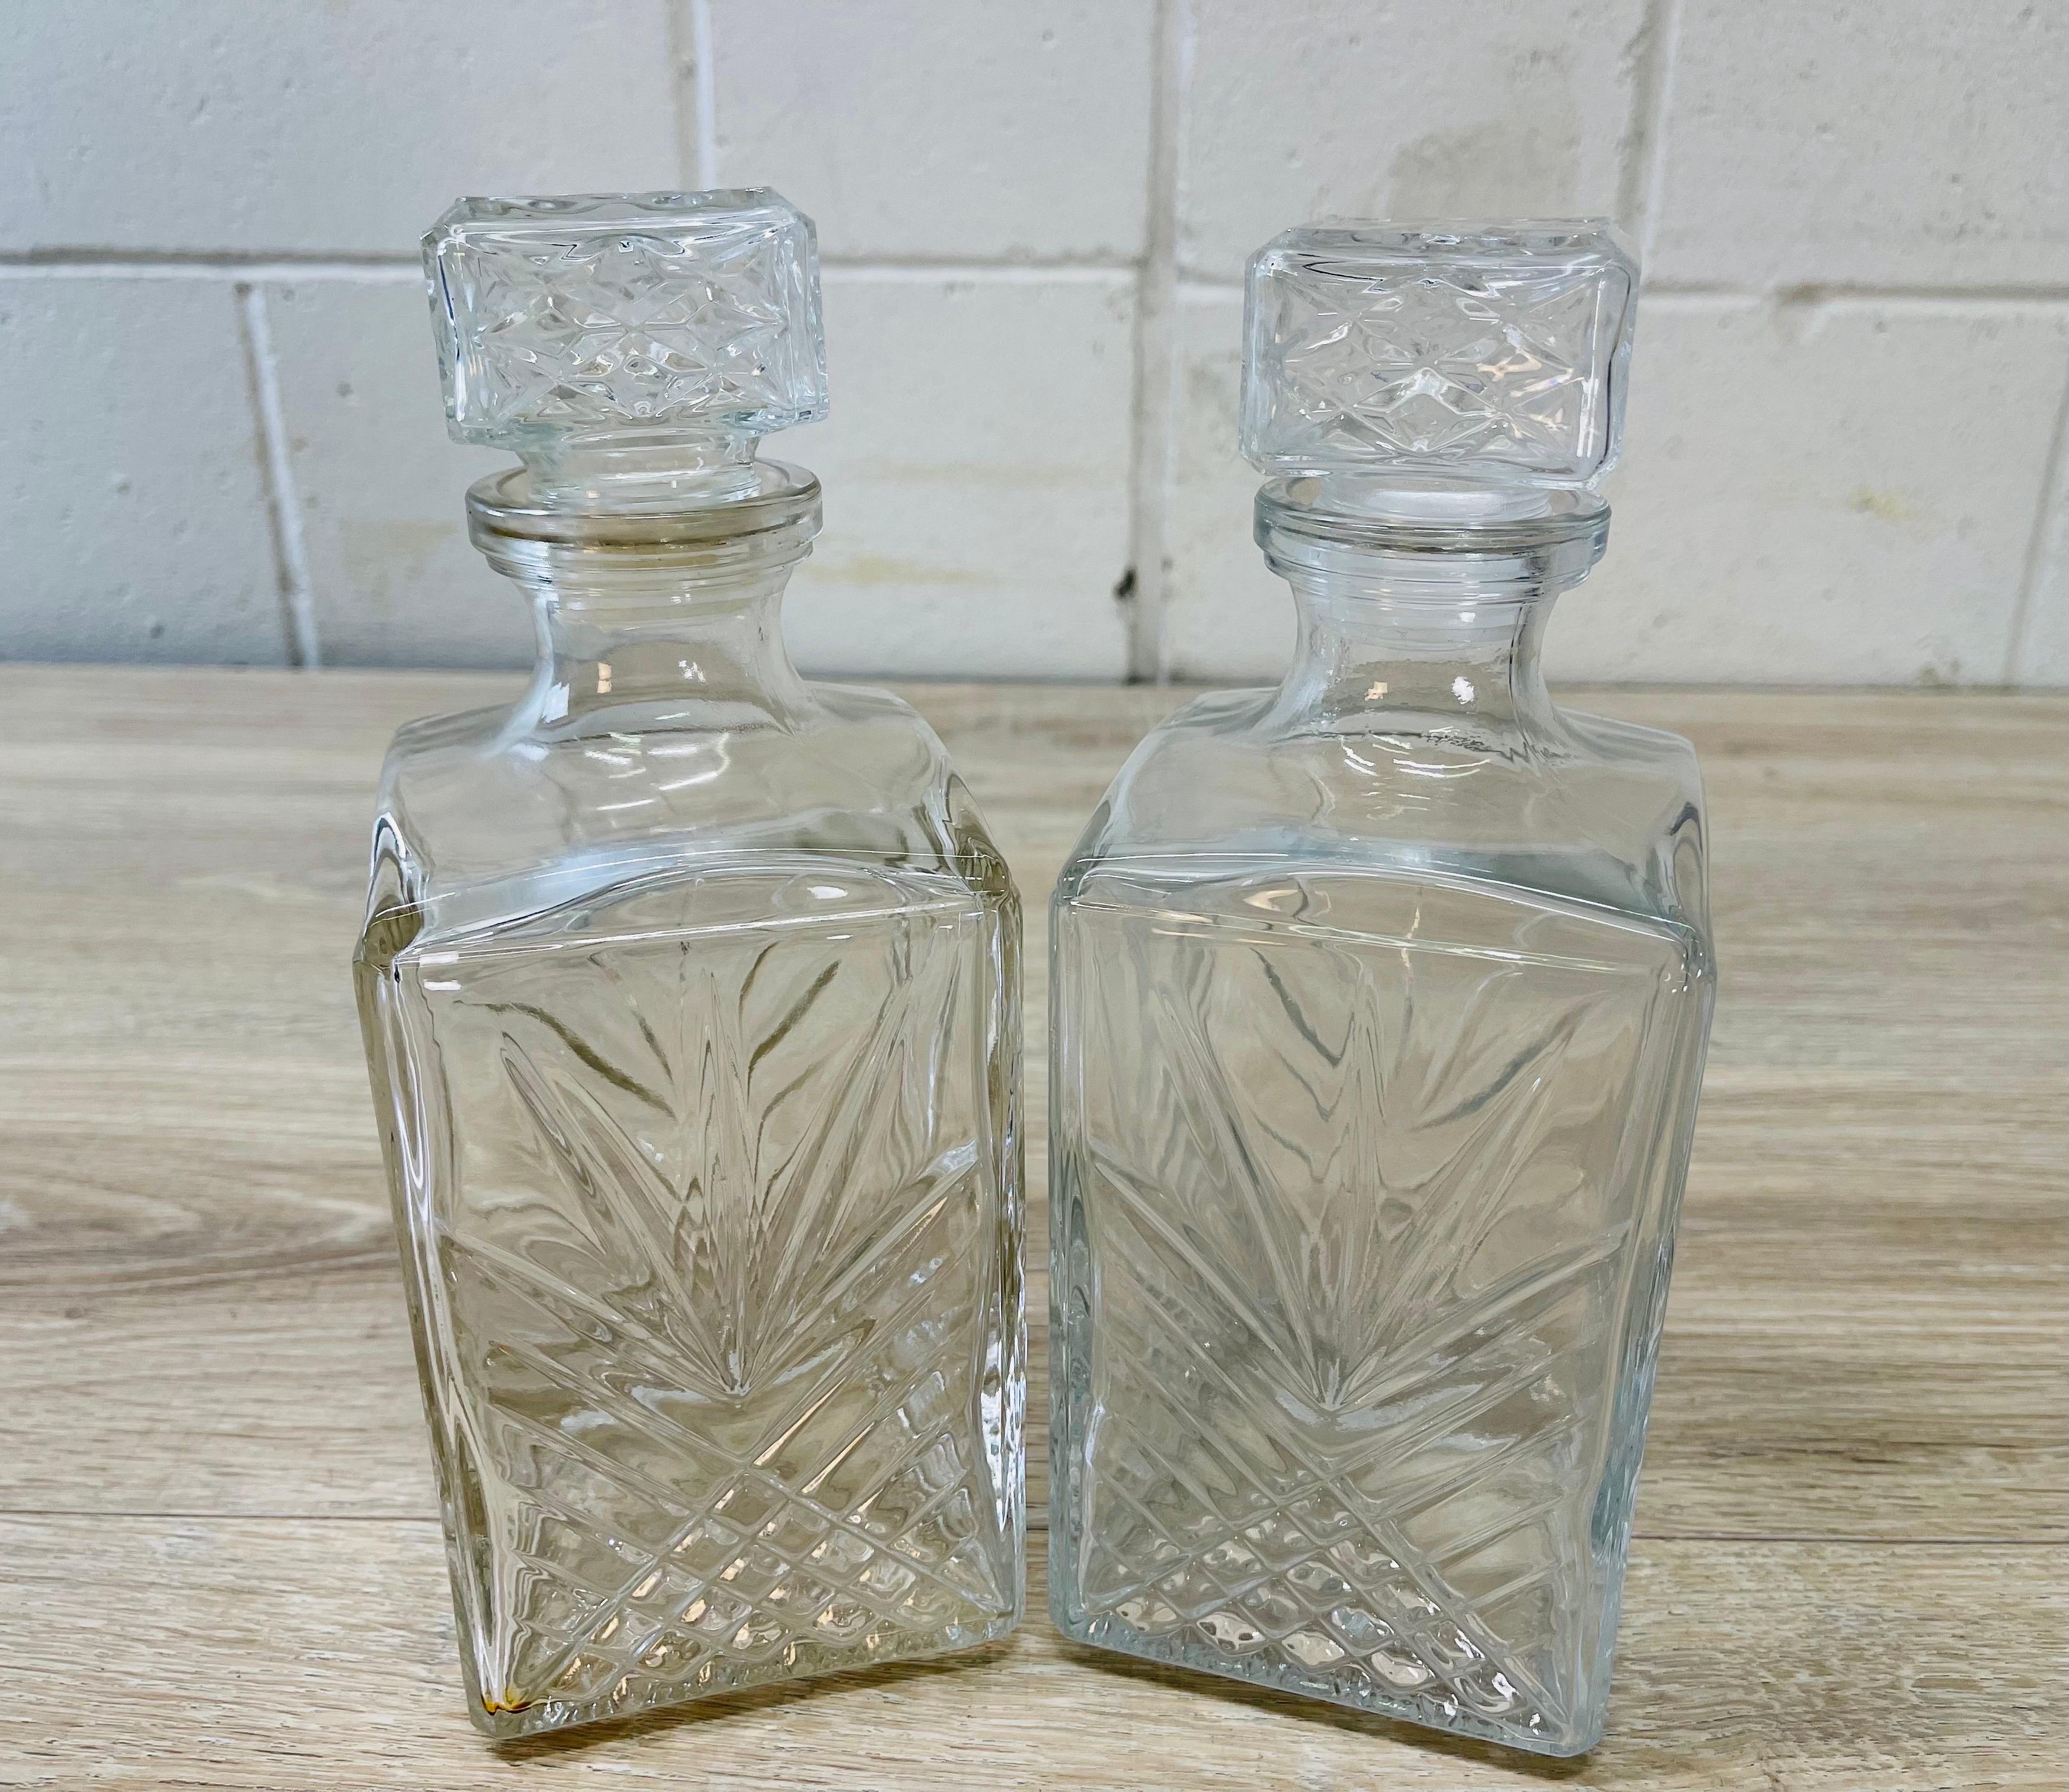 Vintage 1960s pair of square glass decanters with a fan design. Decanters are marked Italy.